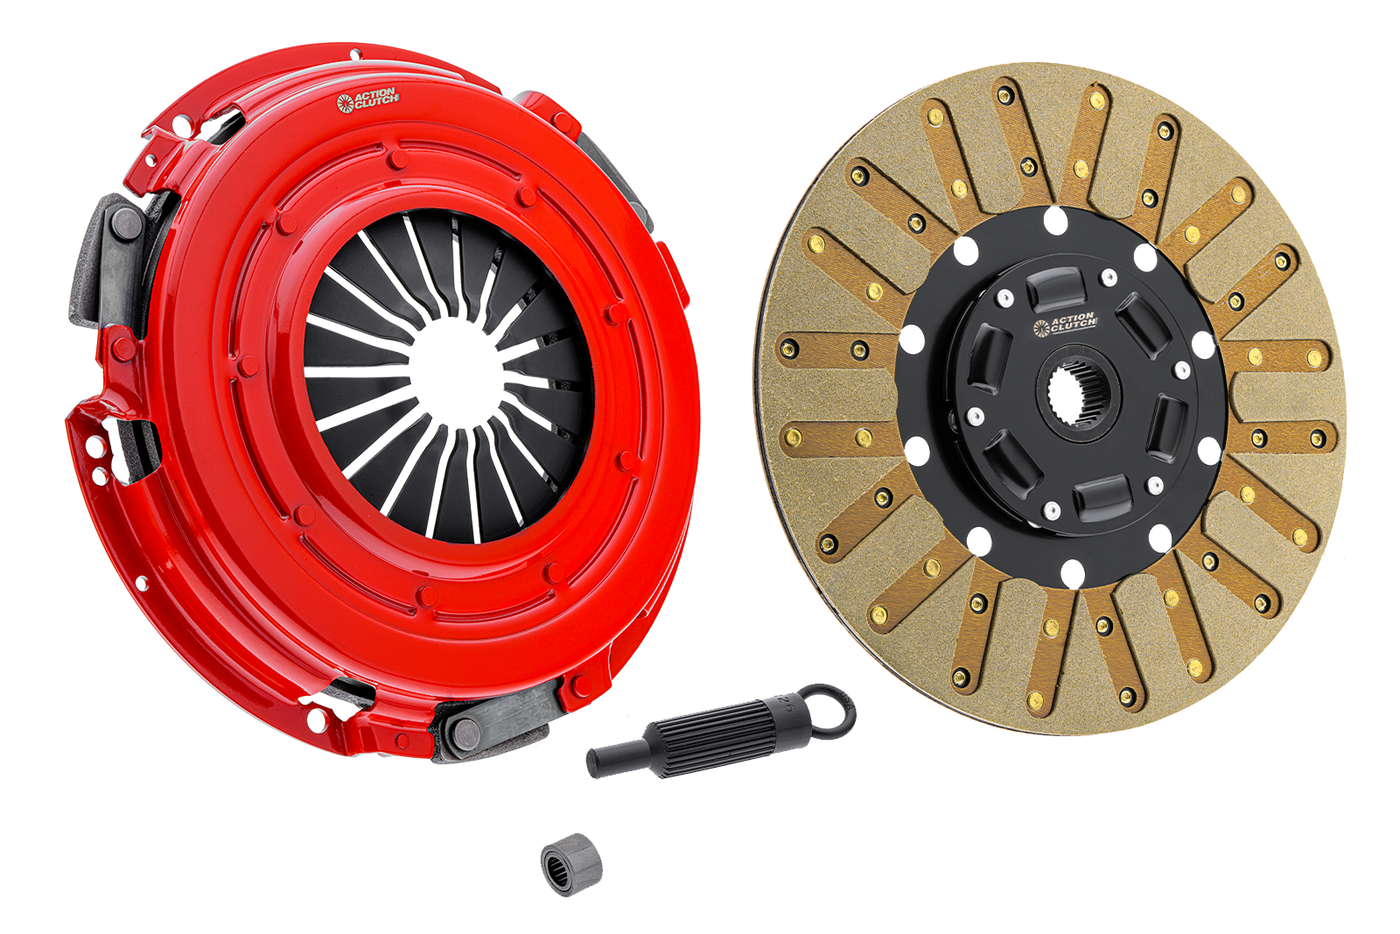 Stage 2 Clutch Kit (1KS) for Chevrolet Corvette Z06 2001-2004 5.7L (LS6) Without Slave and Release Bearing